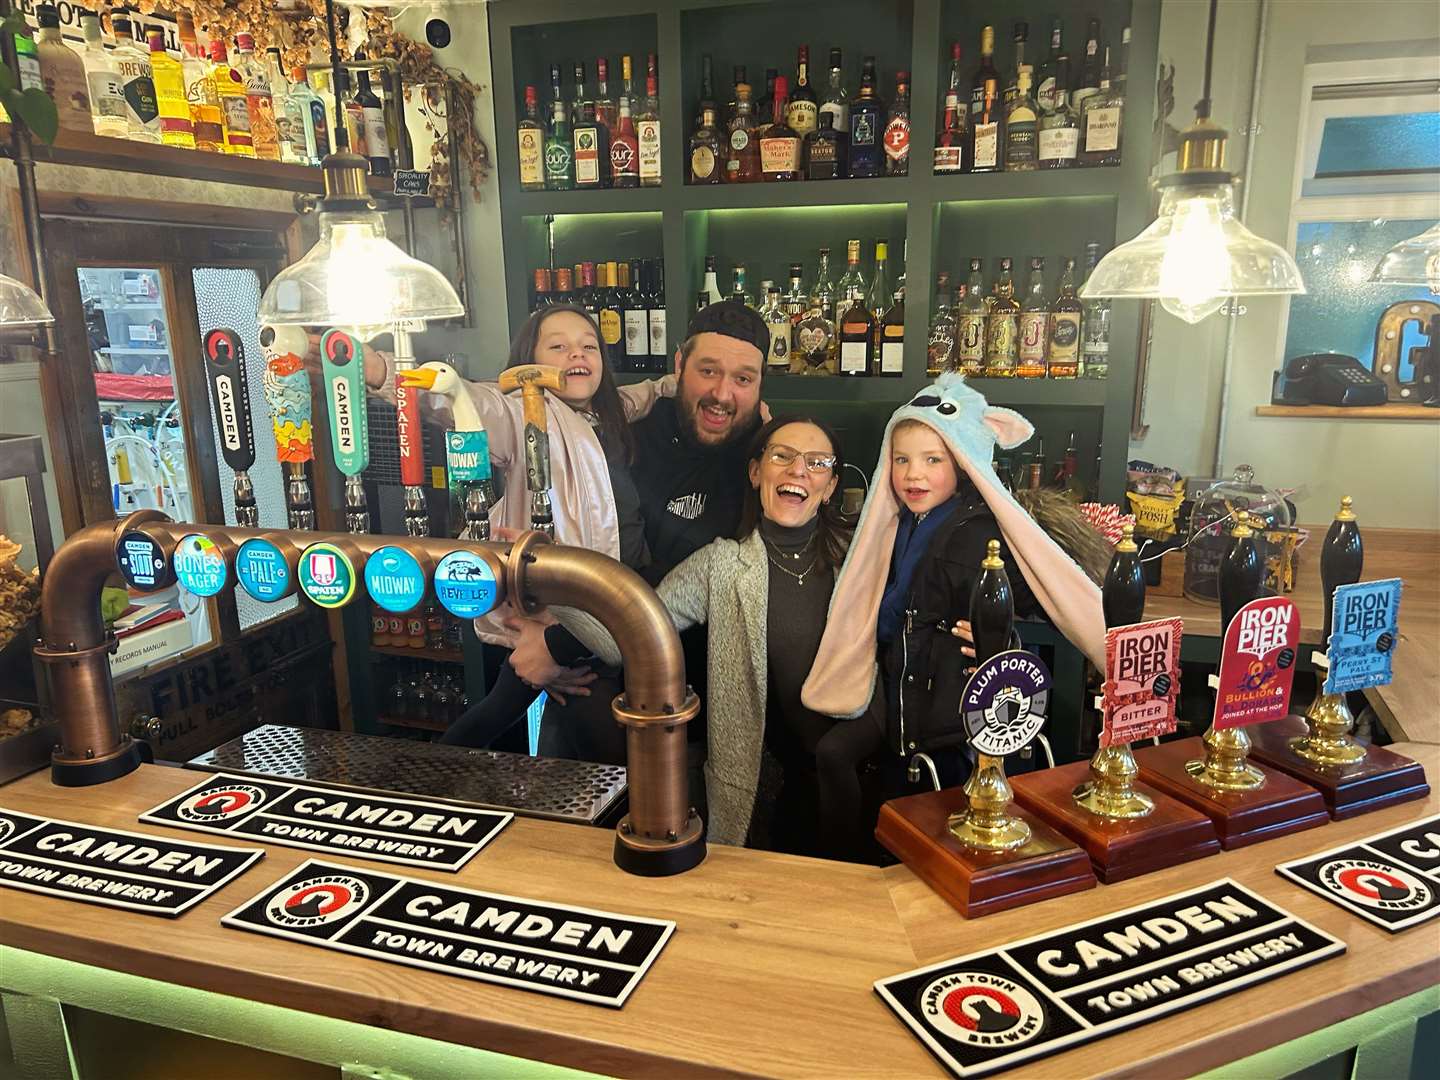 Dave and Sasha Miller with children Tiffany, nine, and Lilly, four, at The Cotton Mill in Swanley